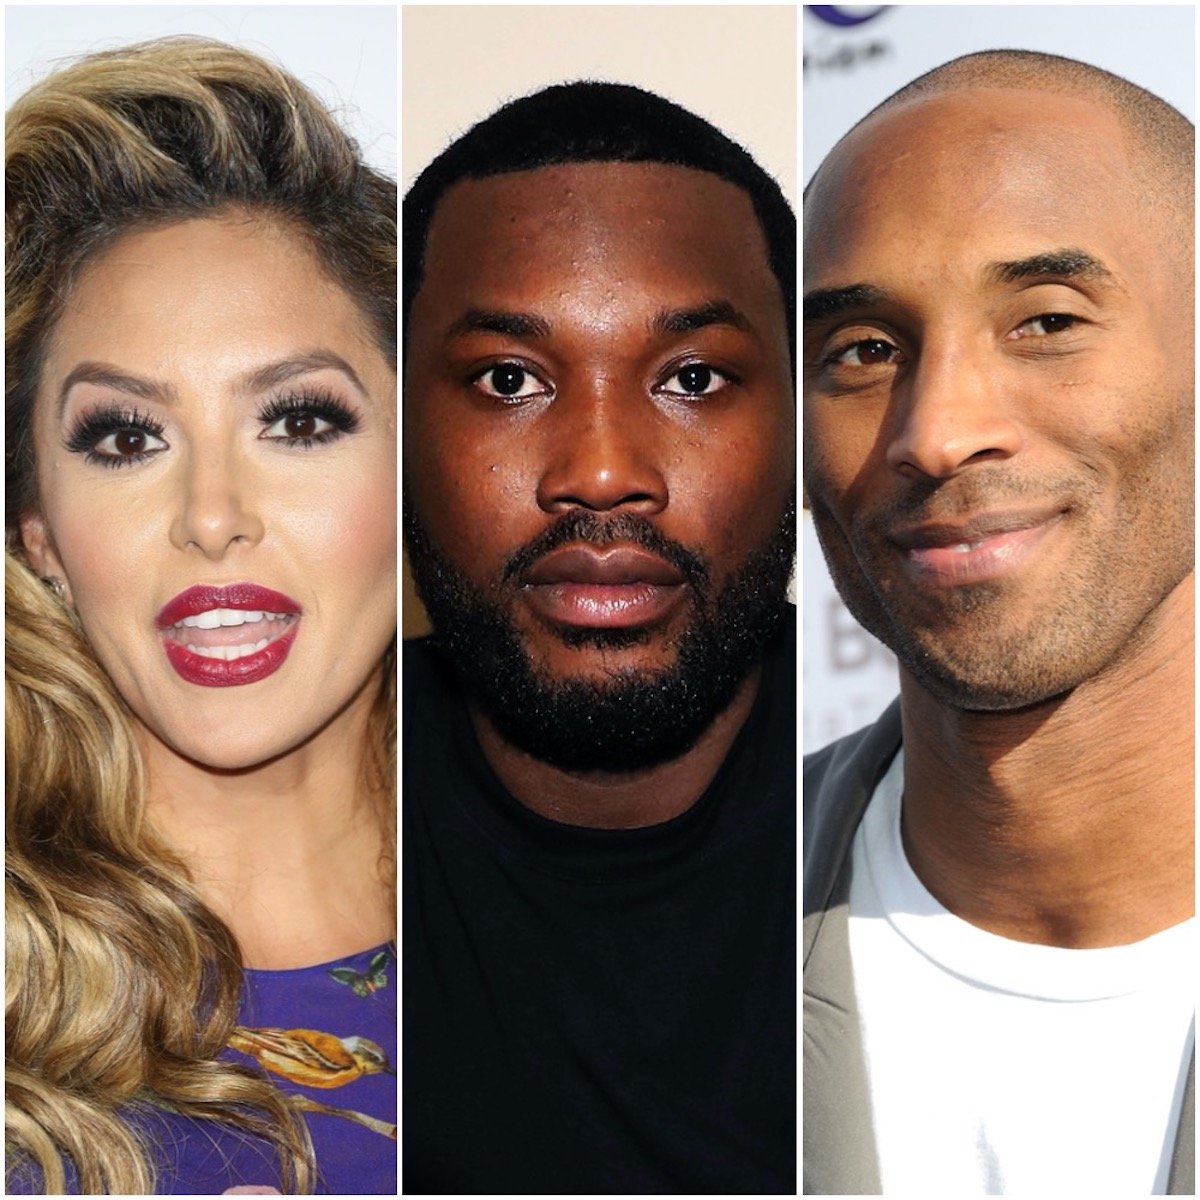 A photo collage of Vanessa Bryant, Meek Mill, and Kobe Bryant